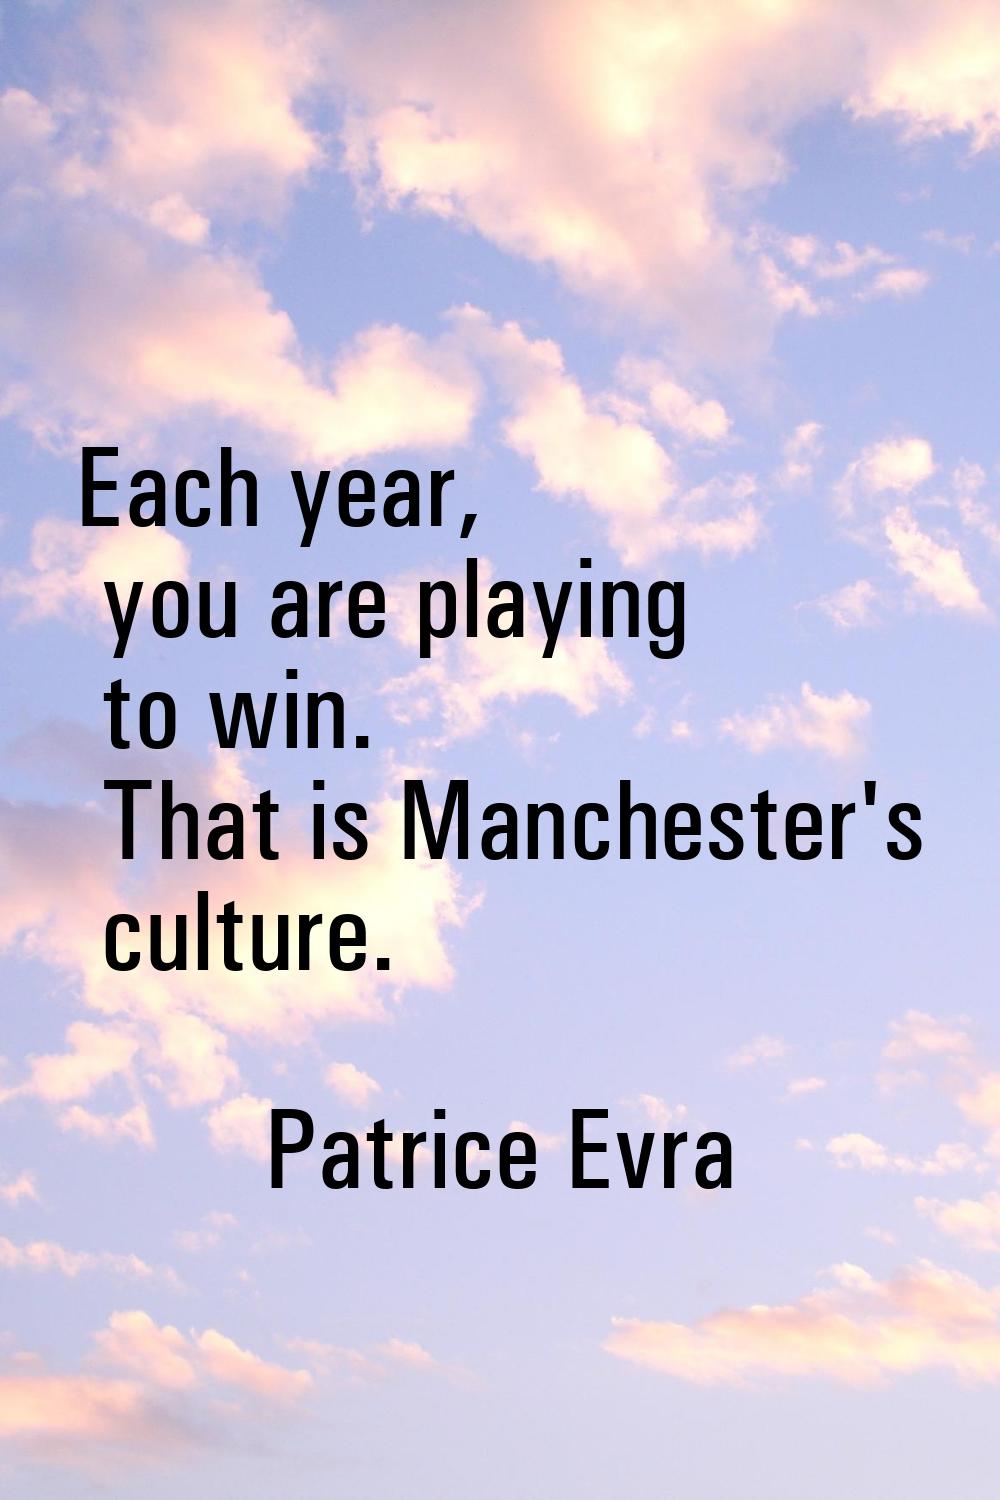 Each year, you are playing to win. That is Manchester's culture.